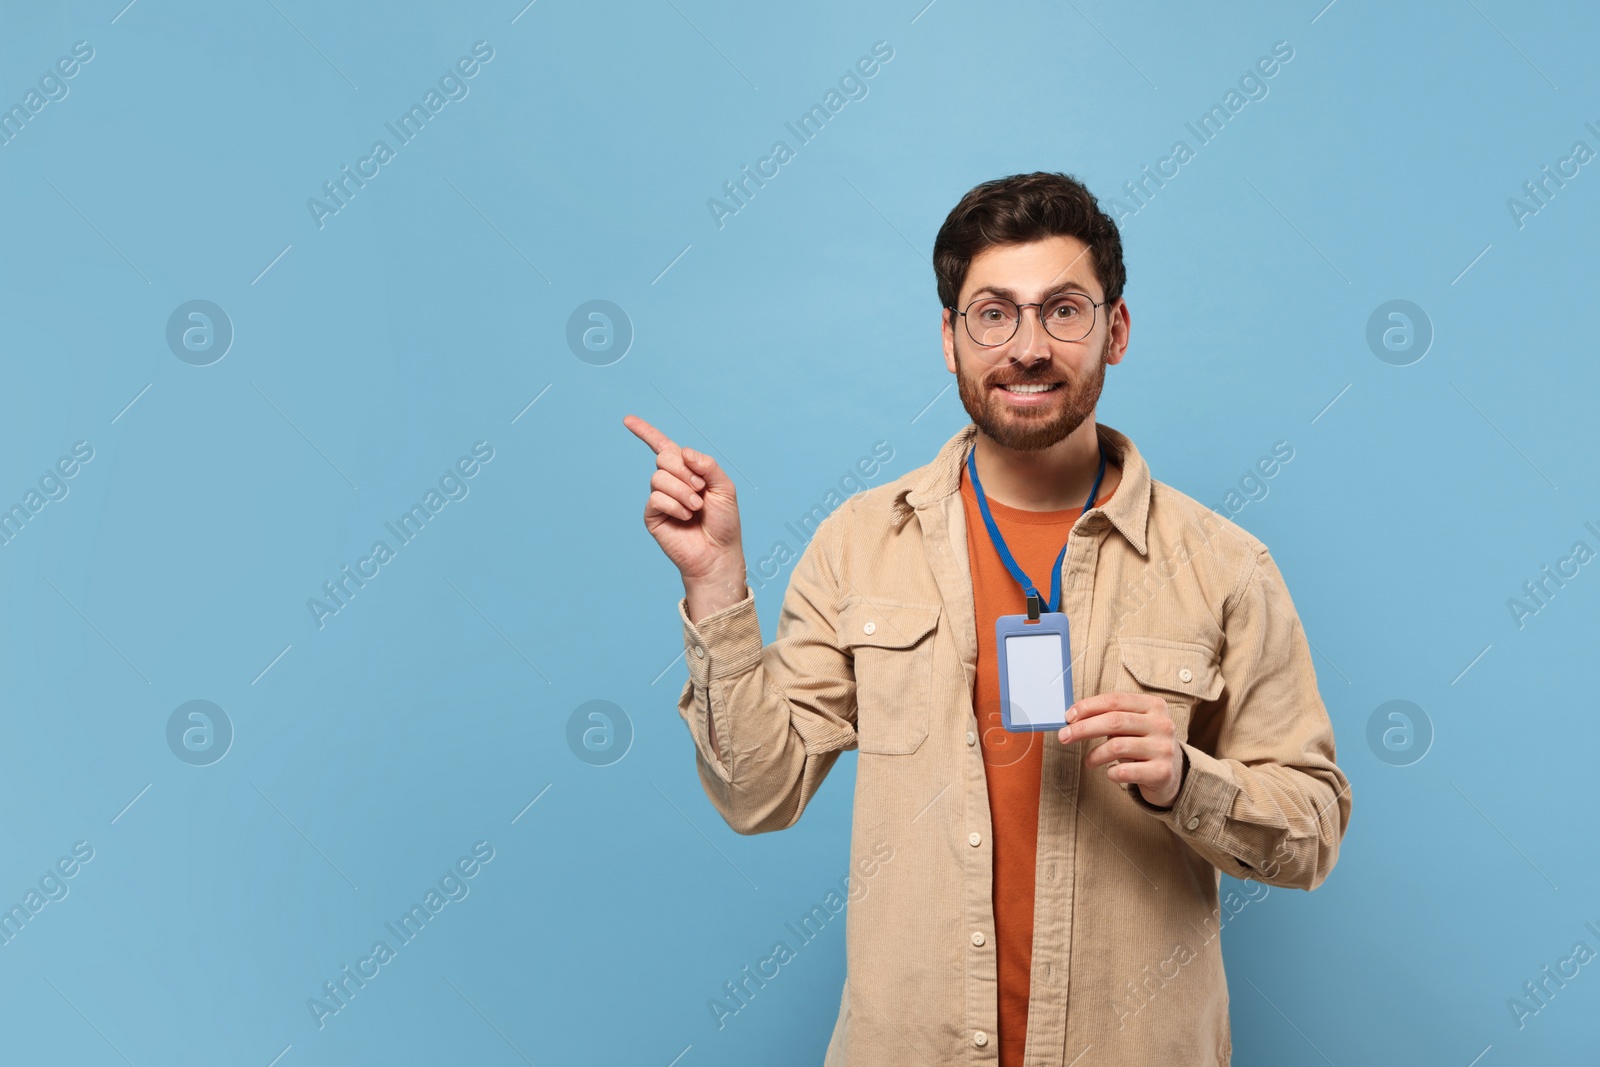 Photo of Smiling man showing VIP pass badge on light blue background, space for text